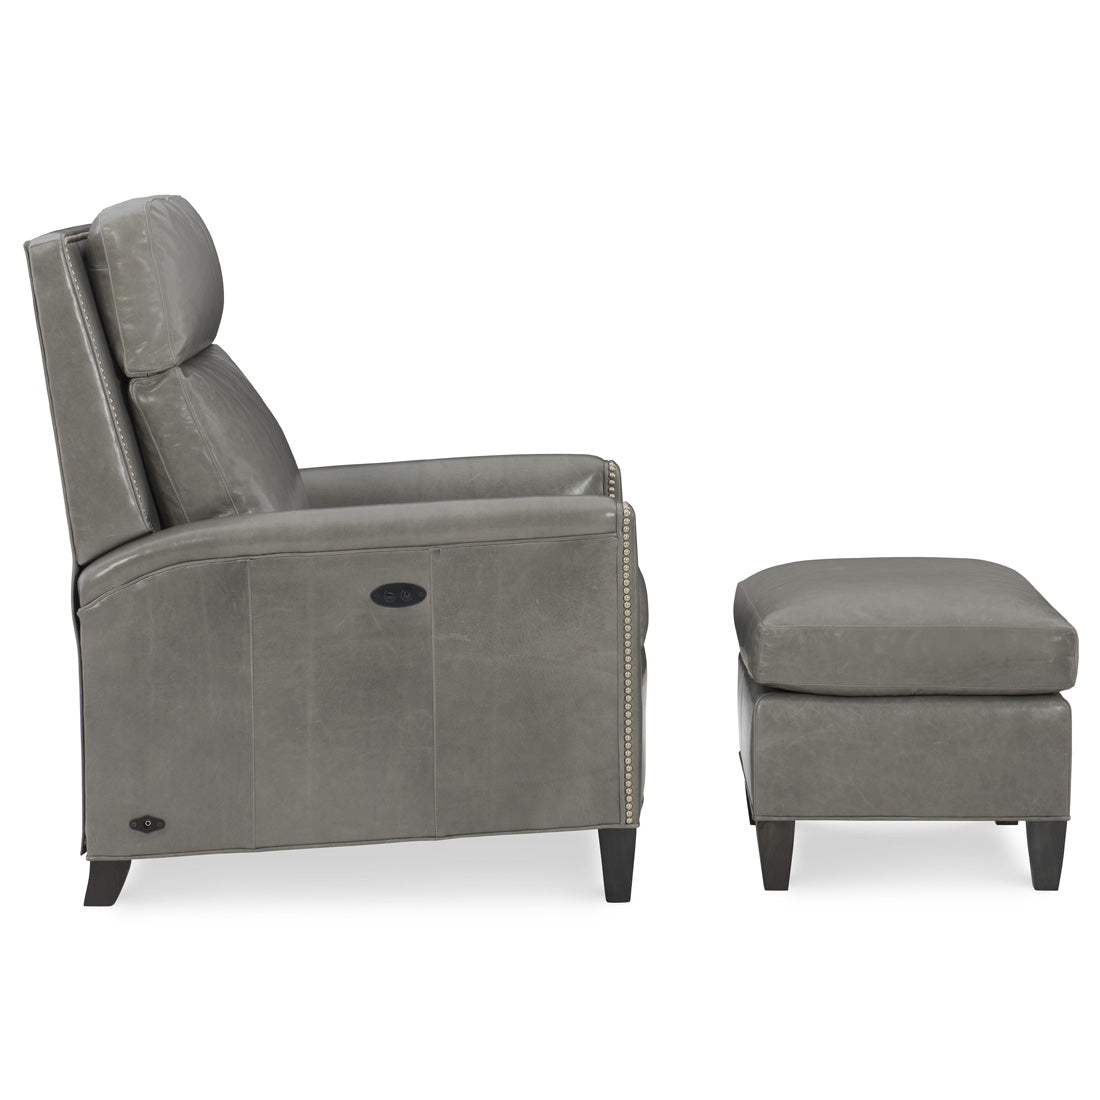 Whitener Leather Tilt Back Chair and Ottoman by Wesley Hall shown in Giles Steel Grey leather - side view upright